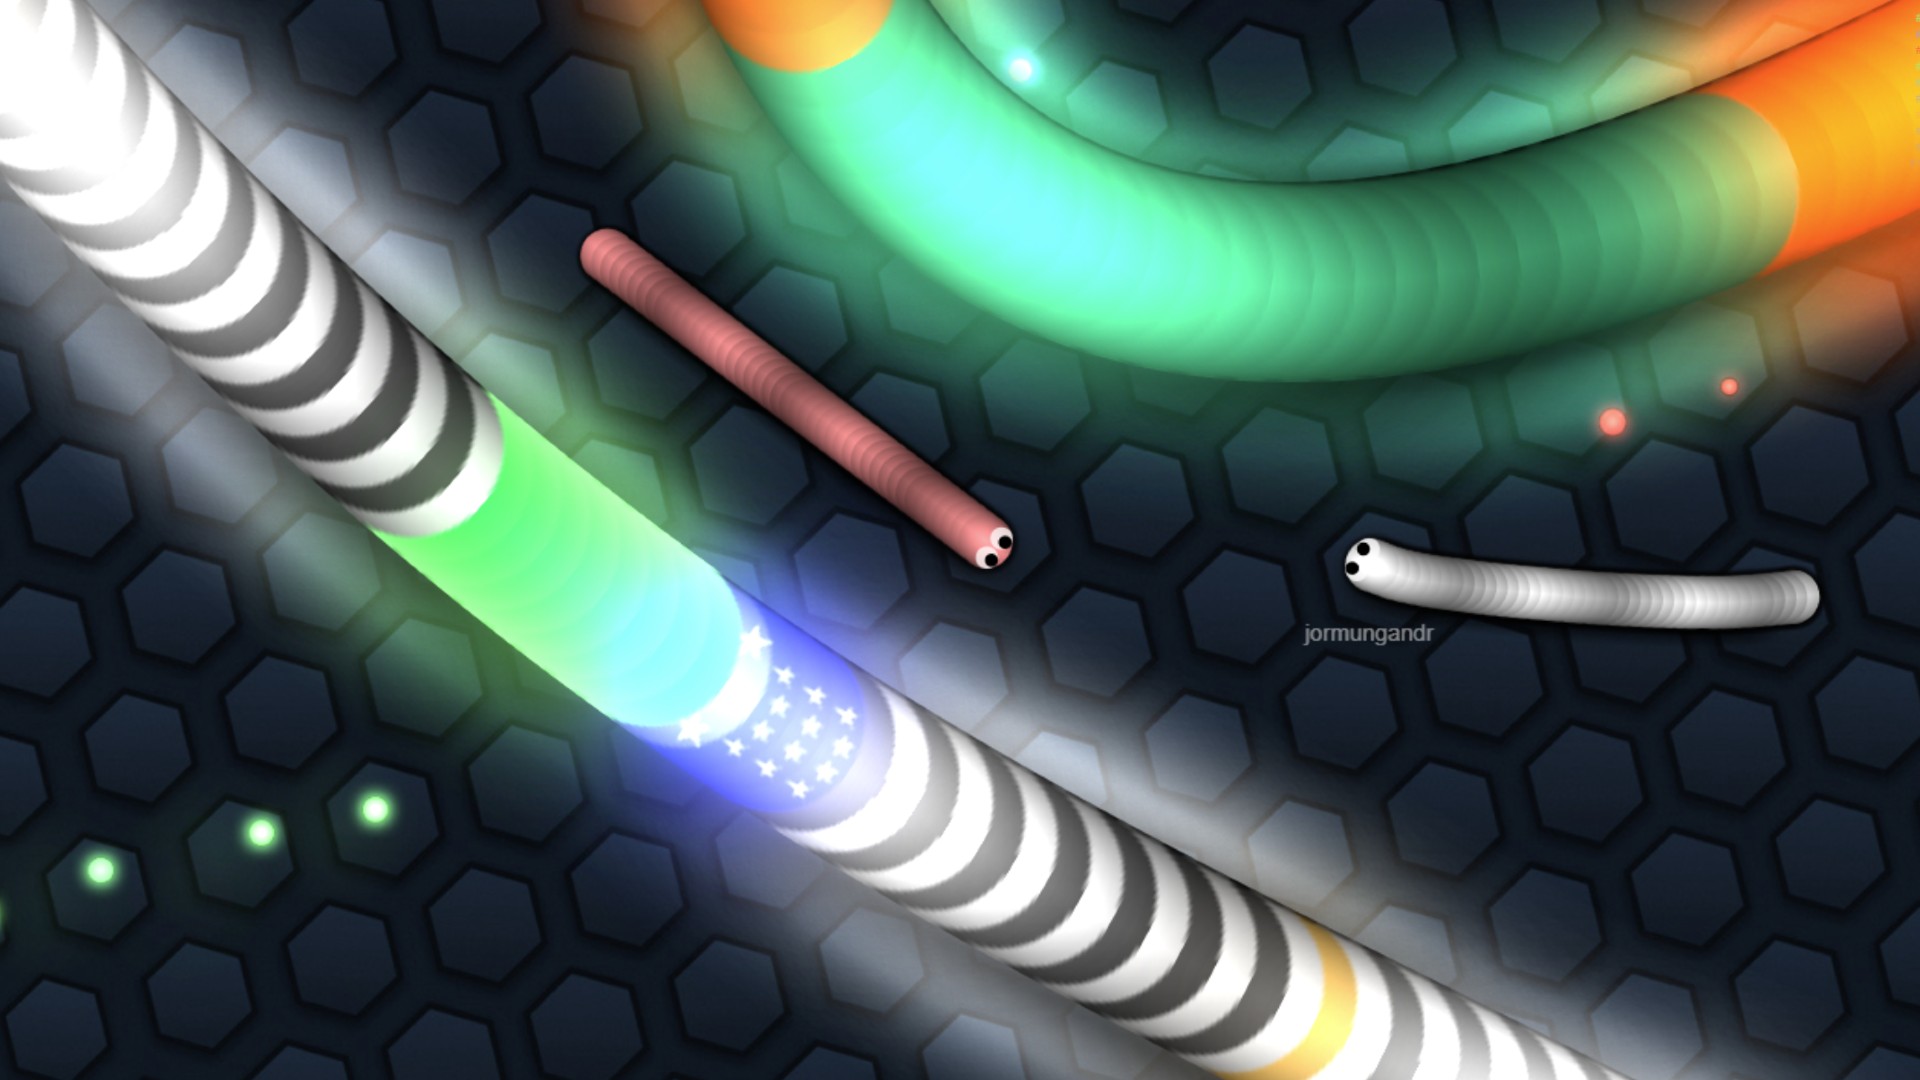 Online games: Slither.io. Image shows lots of tubular creatures slithering around.